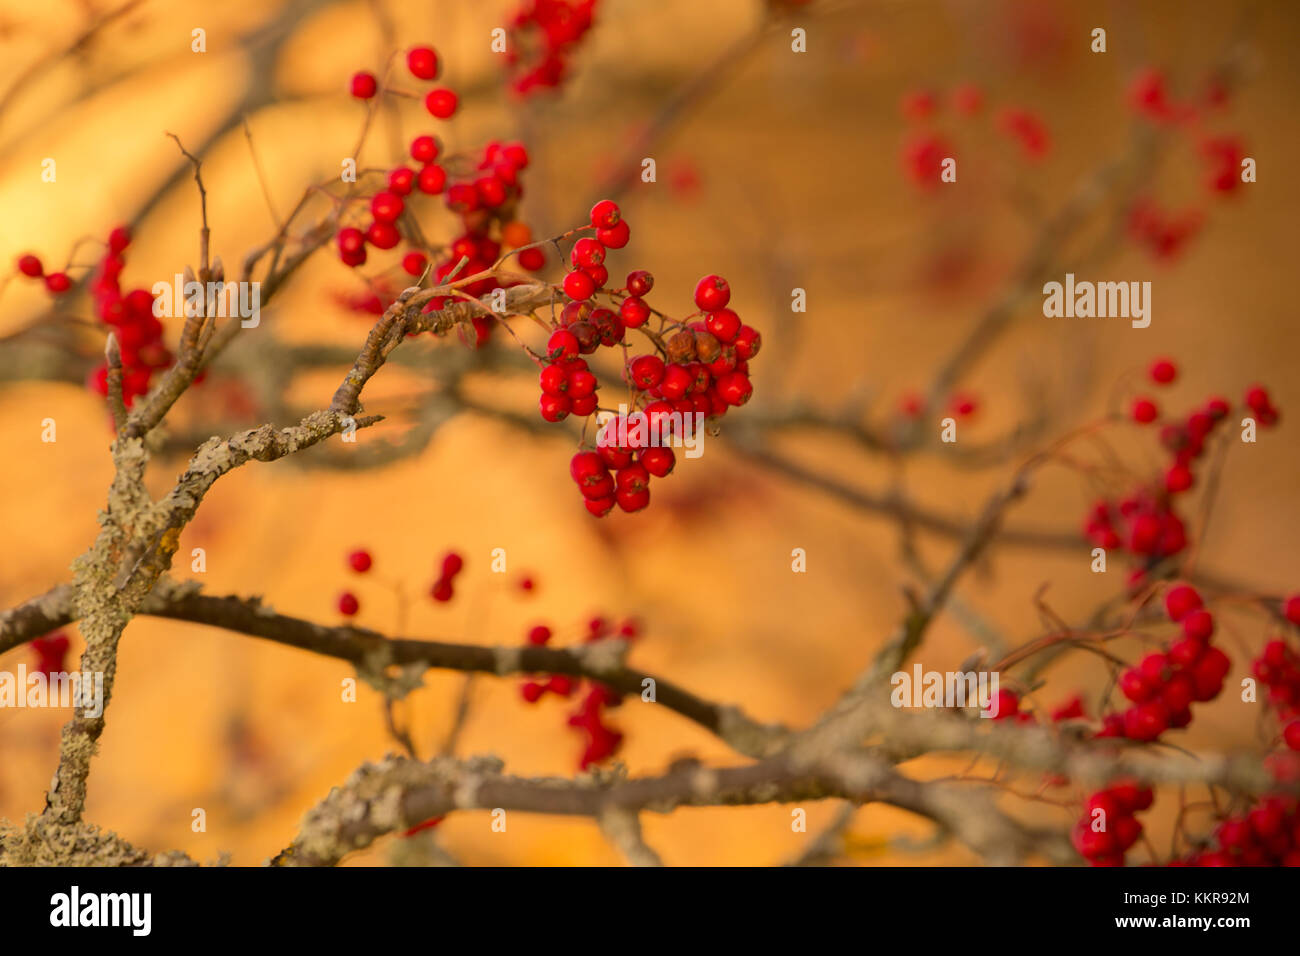 Flechy red rowan berries on rich yellow color of leaves in background Stock Photo